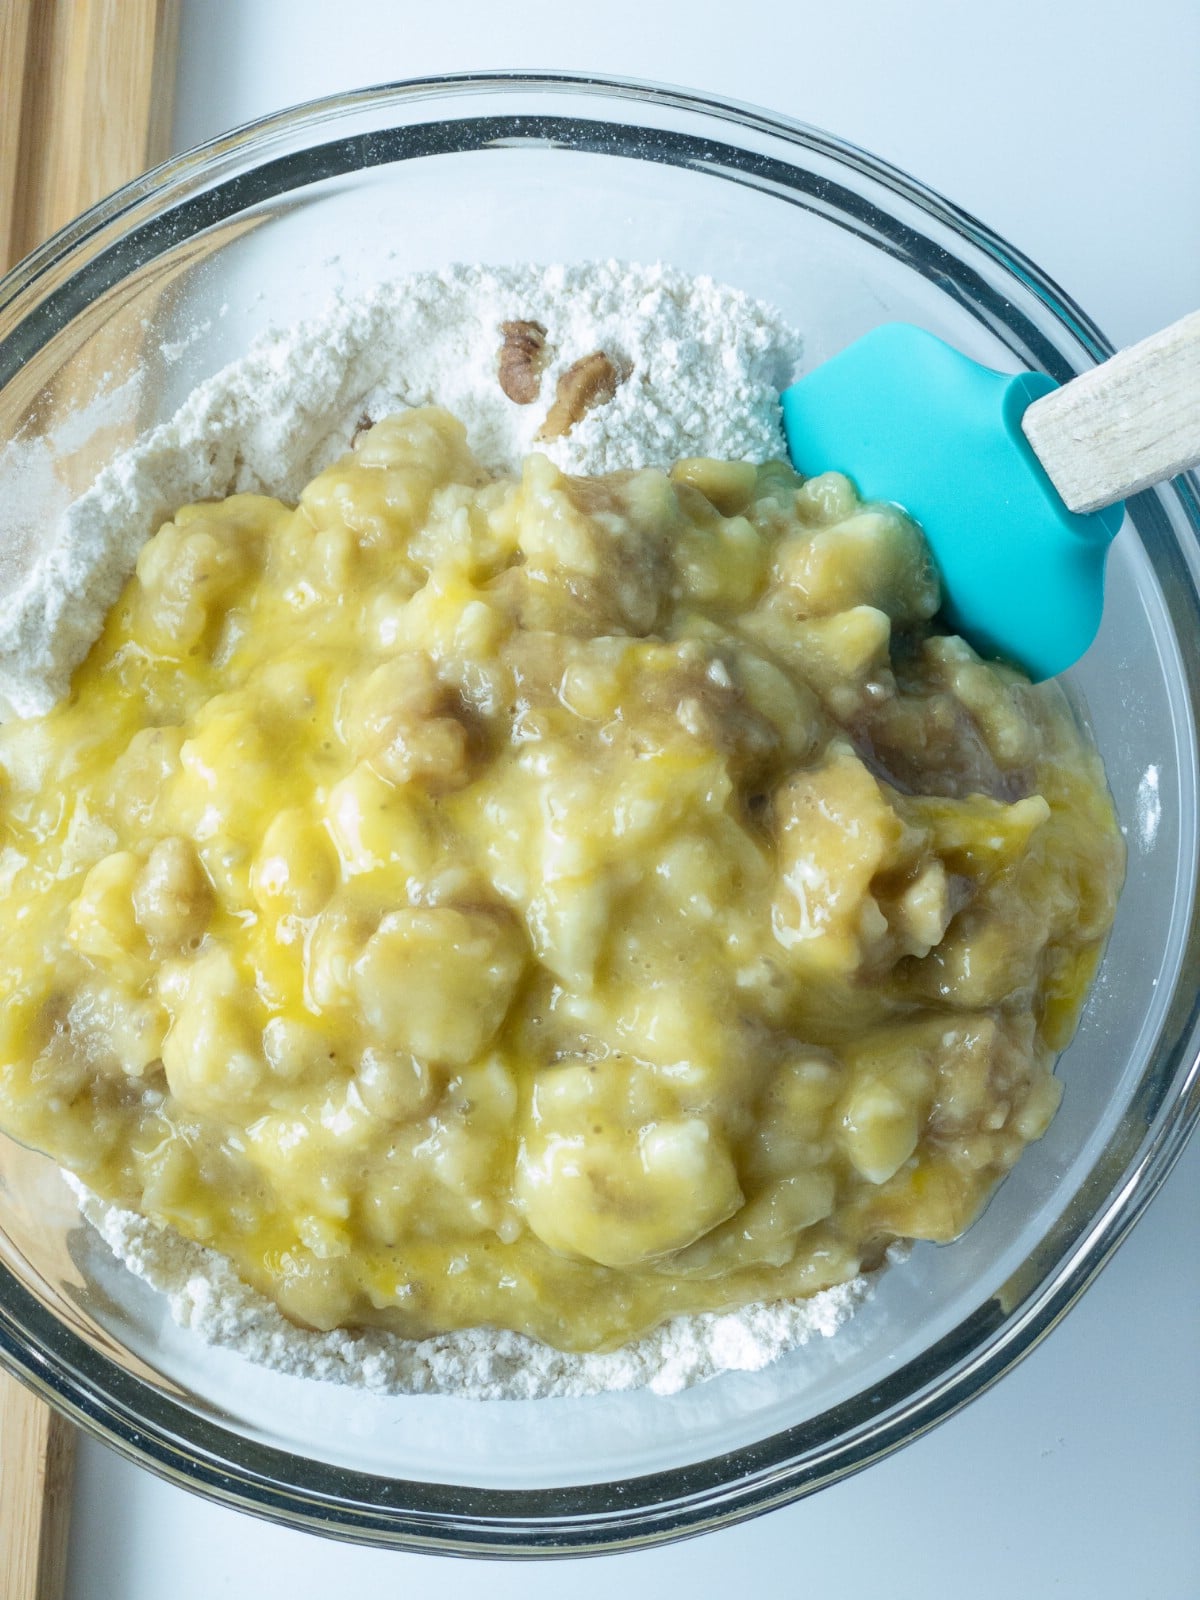 Mashed bananas with flour